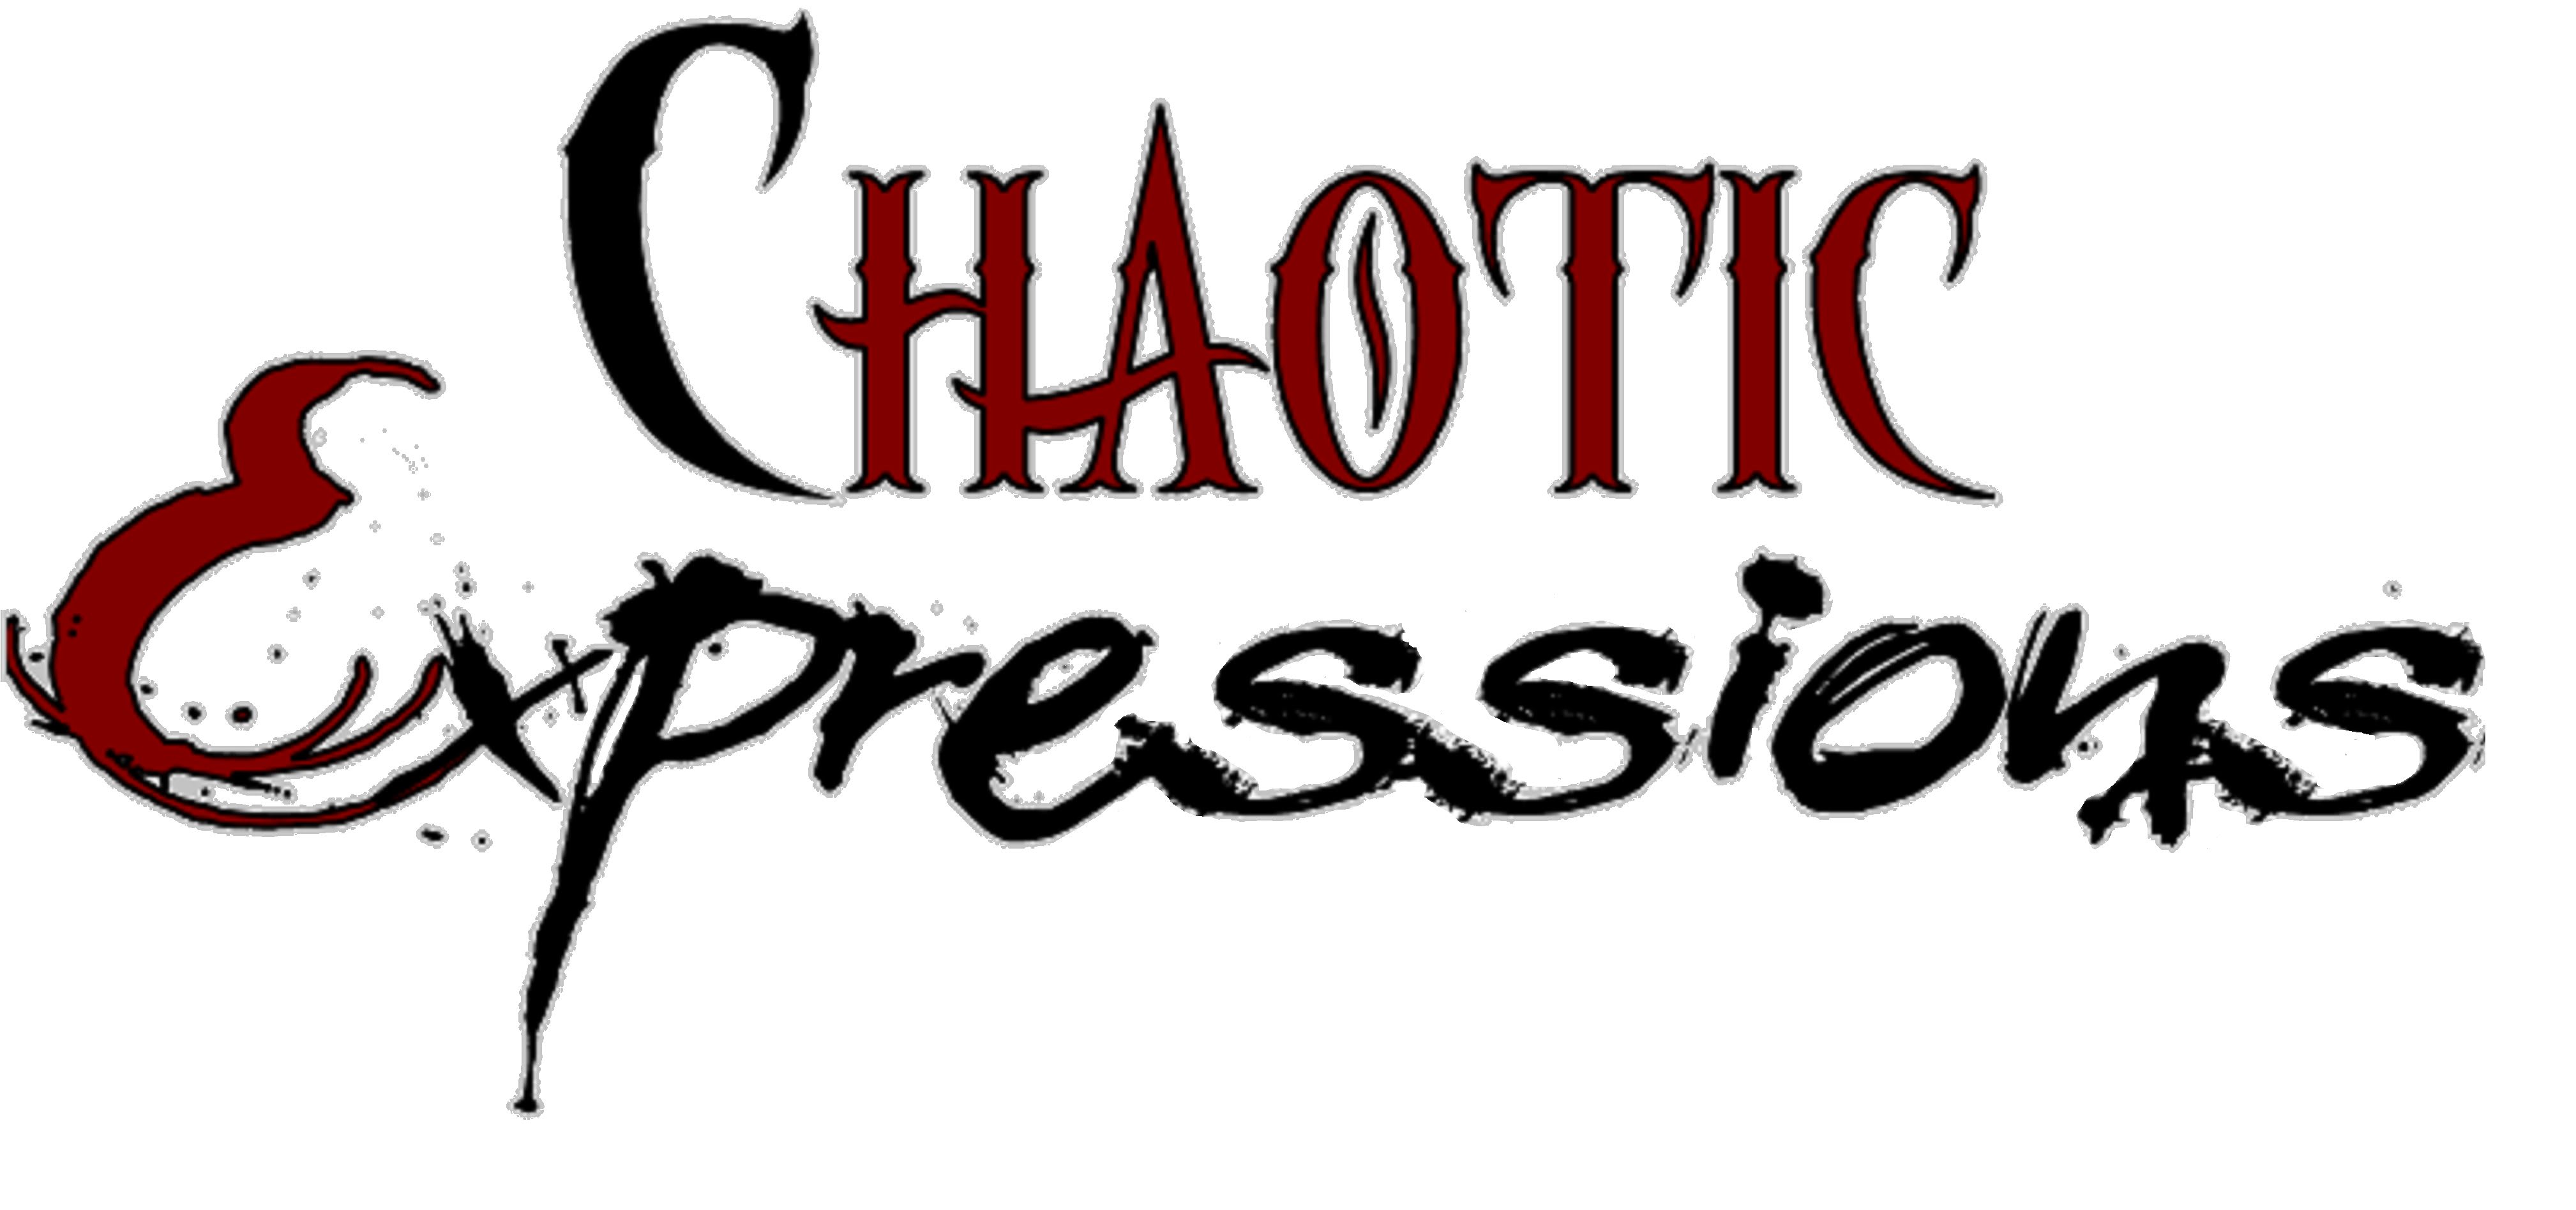 Chaotic Expressions